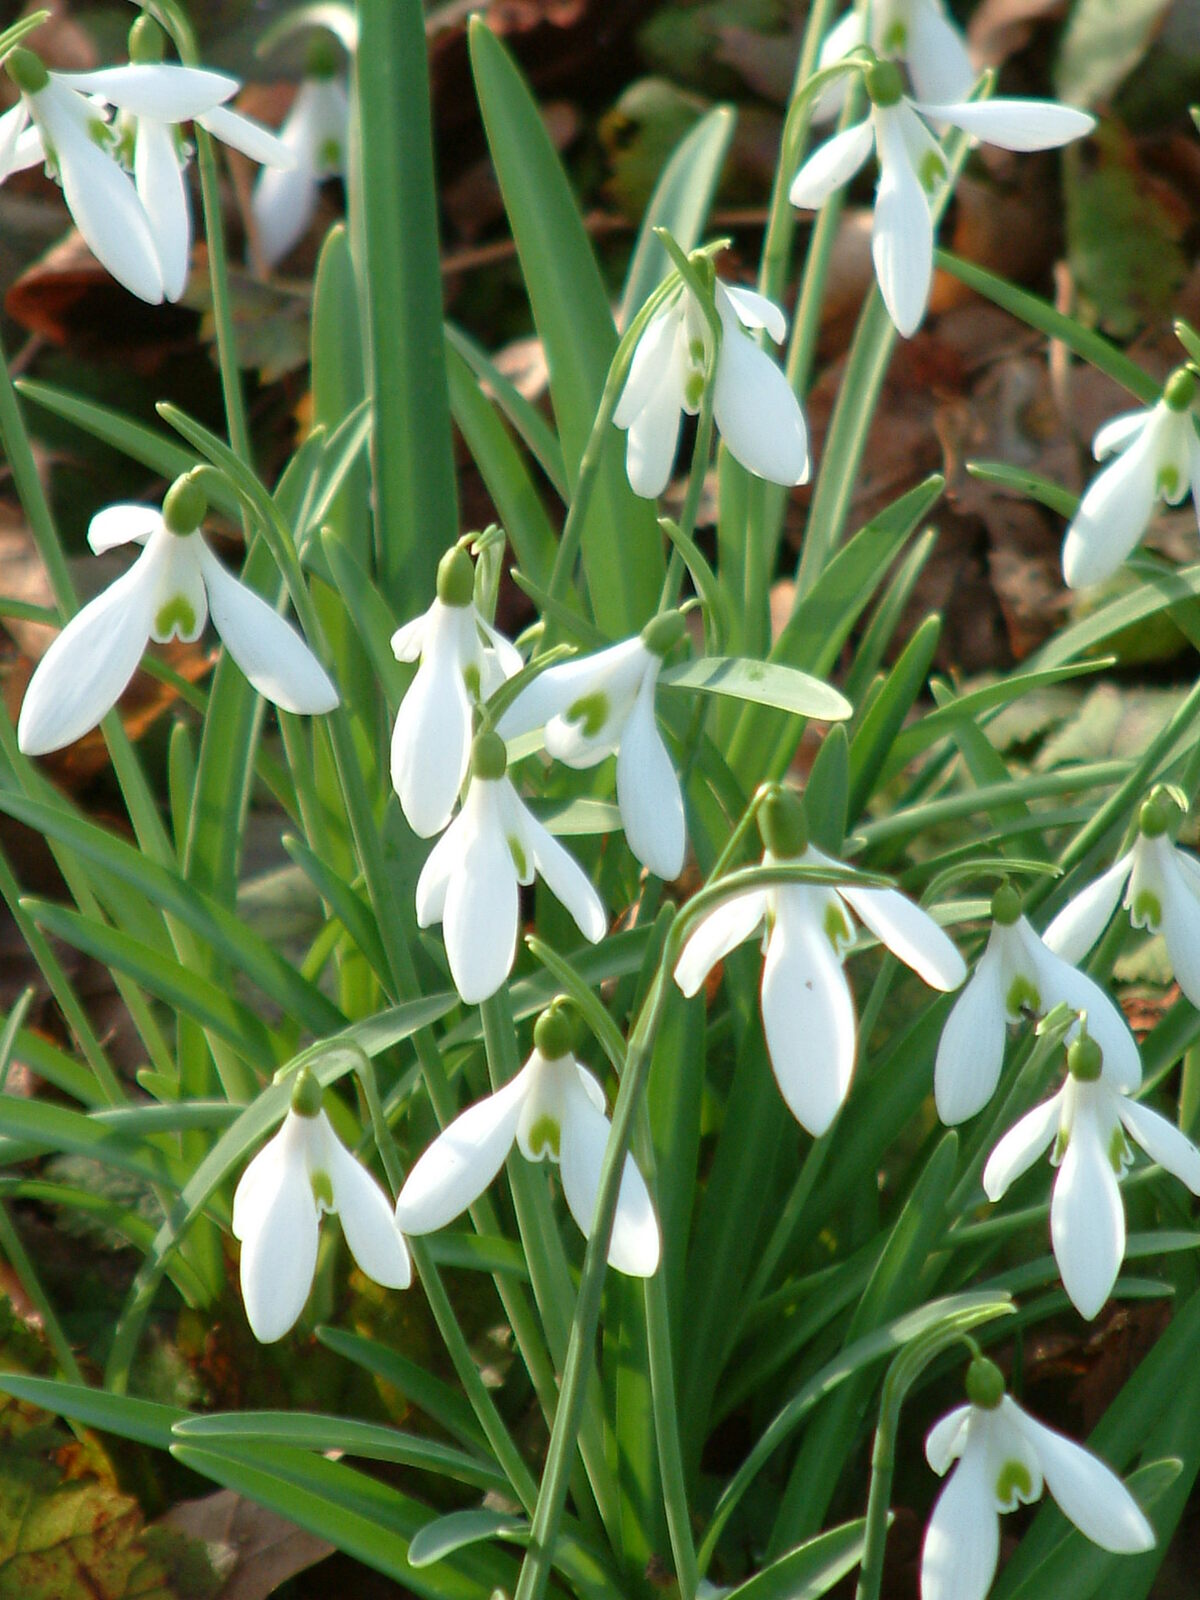 Galanthus 'James Backhouse' - The Beth Chatto Gardens